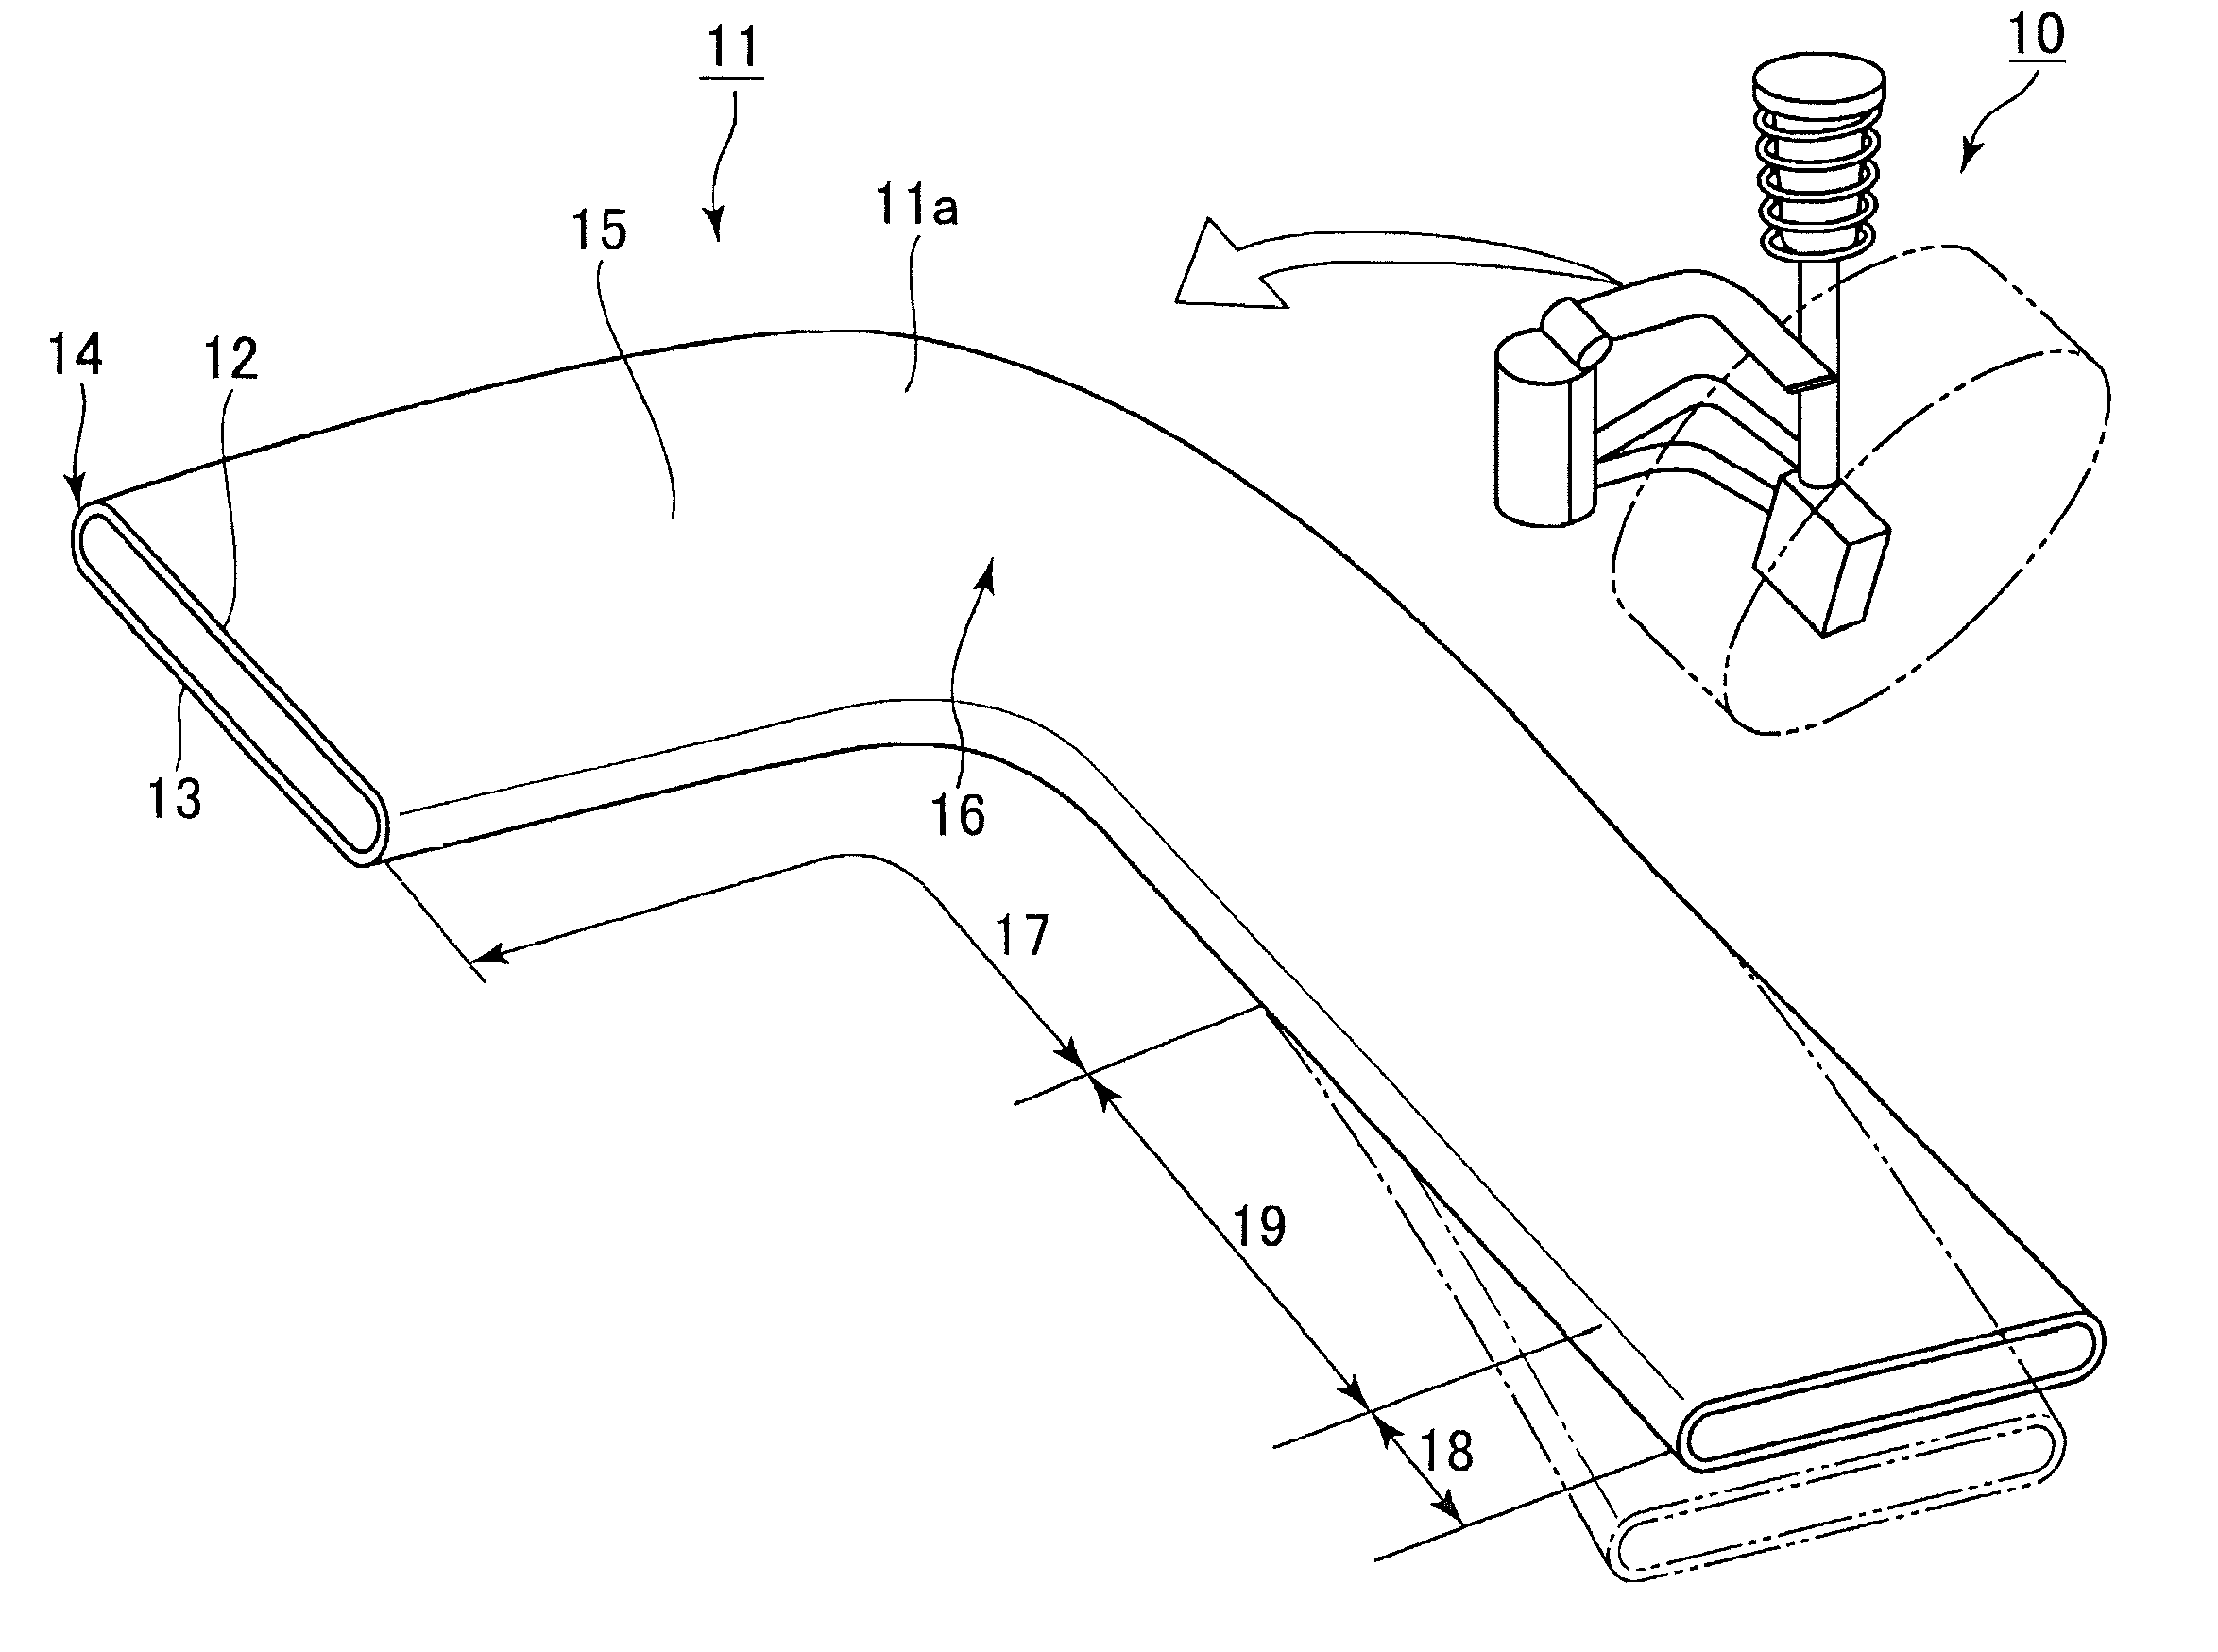 Arm material and a method for its manufacture